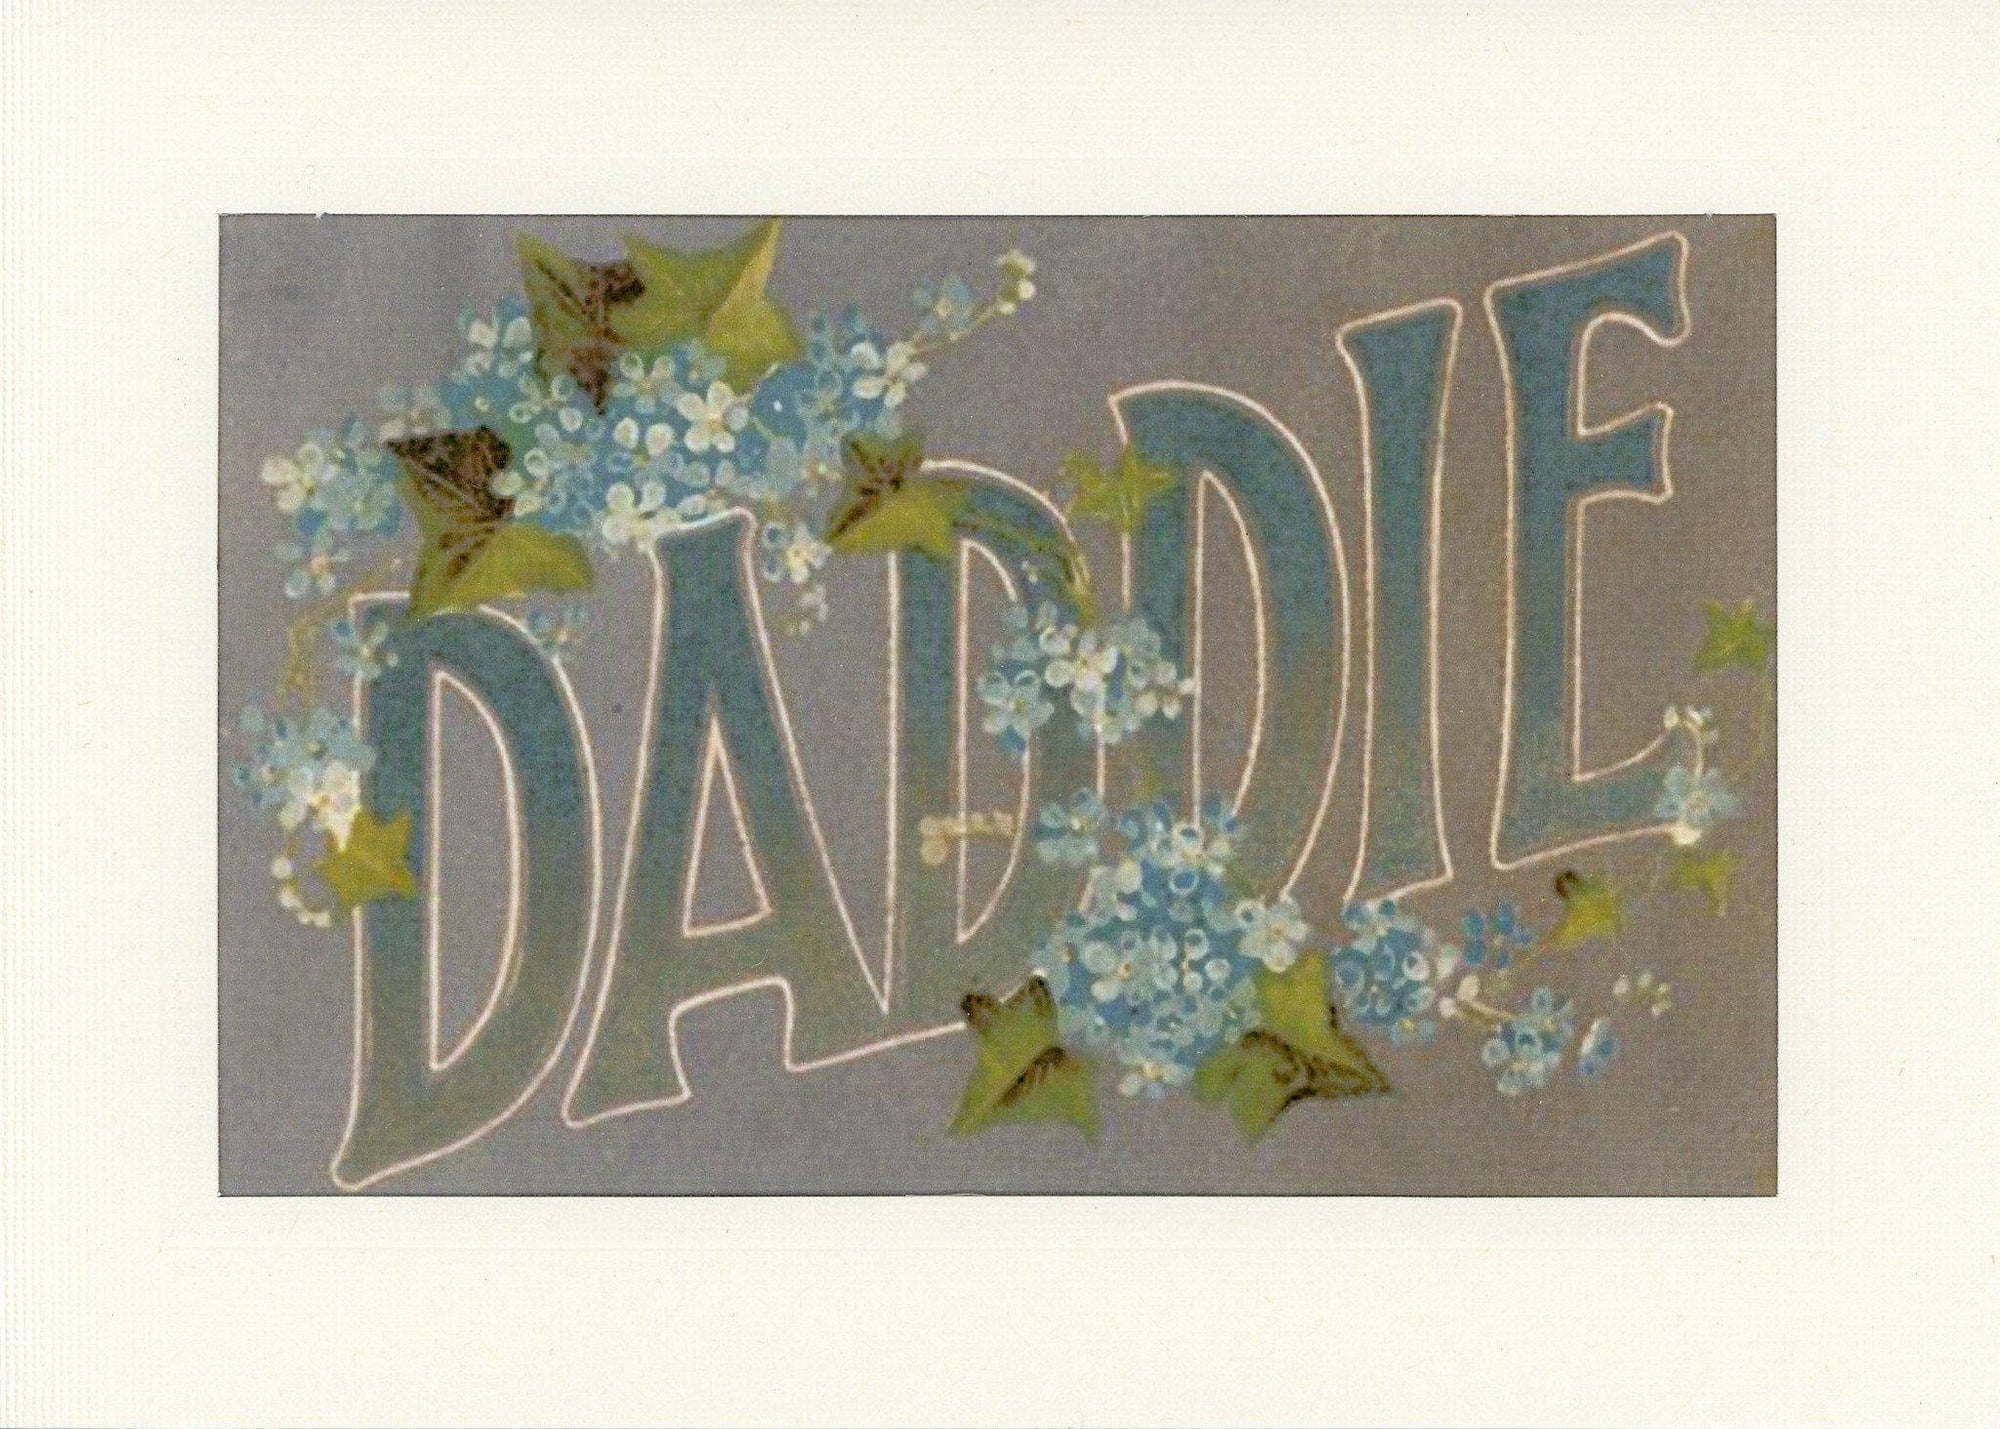 Daddie-Greetings from the Past-Plymouth Cards